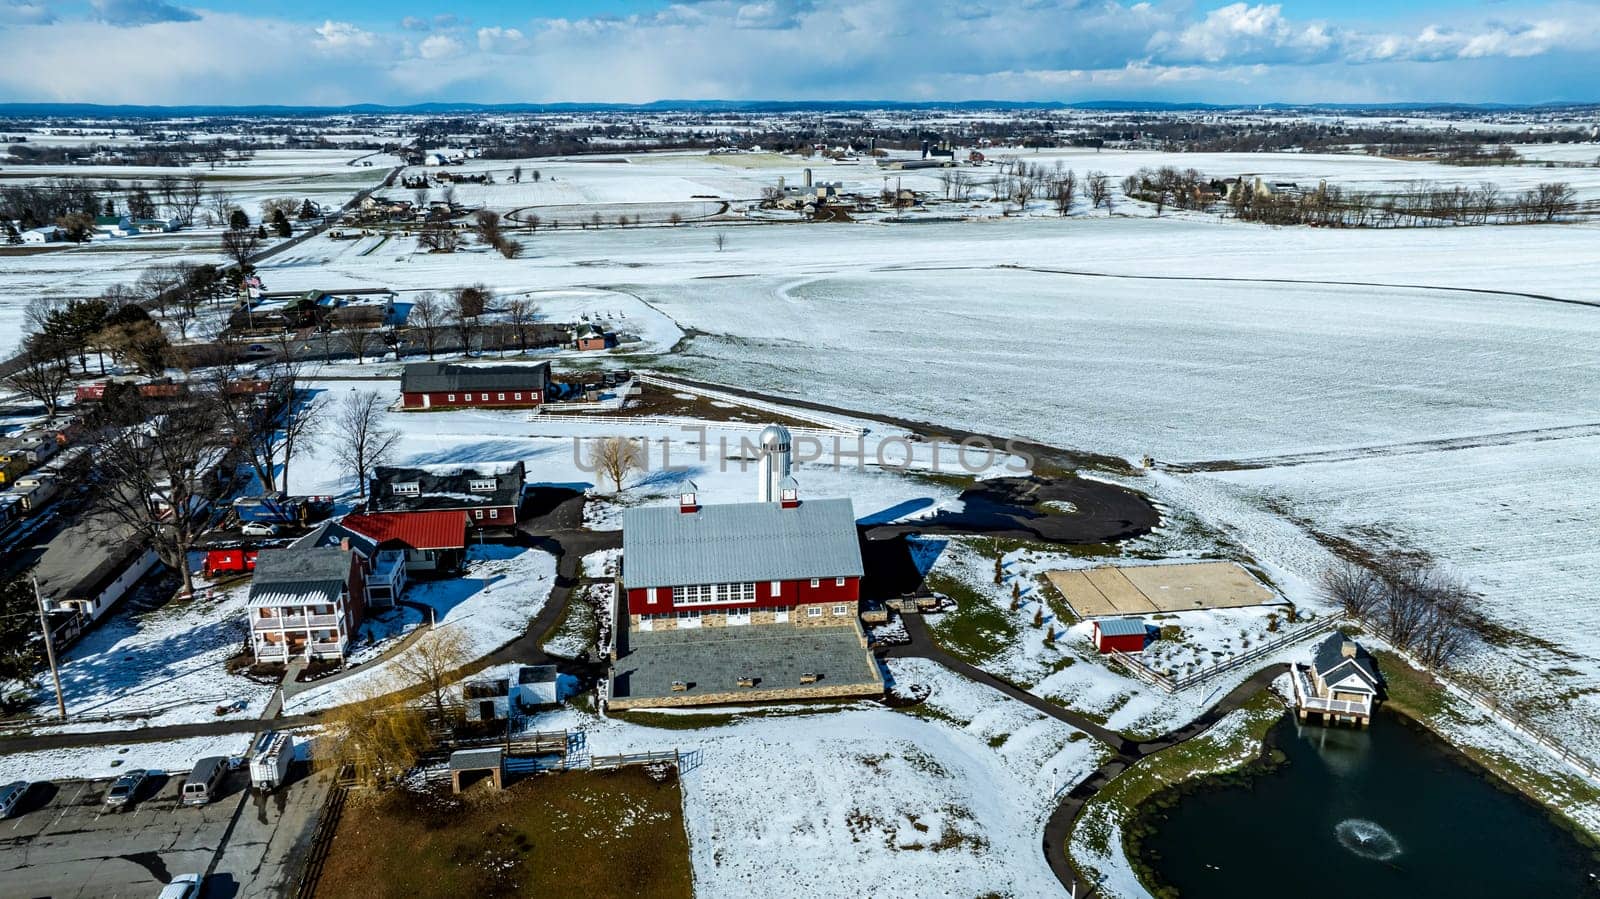 An Aerial View Of A Snowy Rural Community With A Central Pond And Surrounding Buildings.